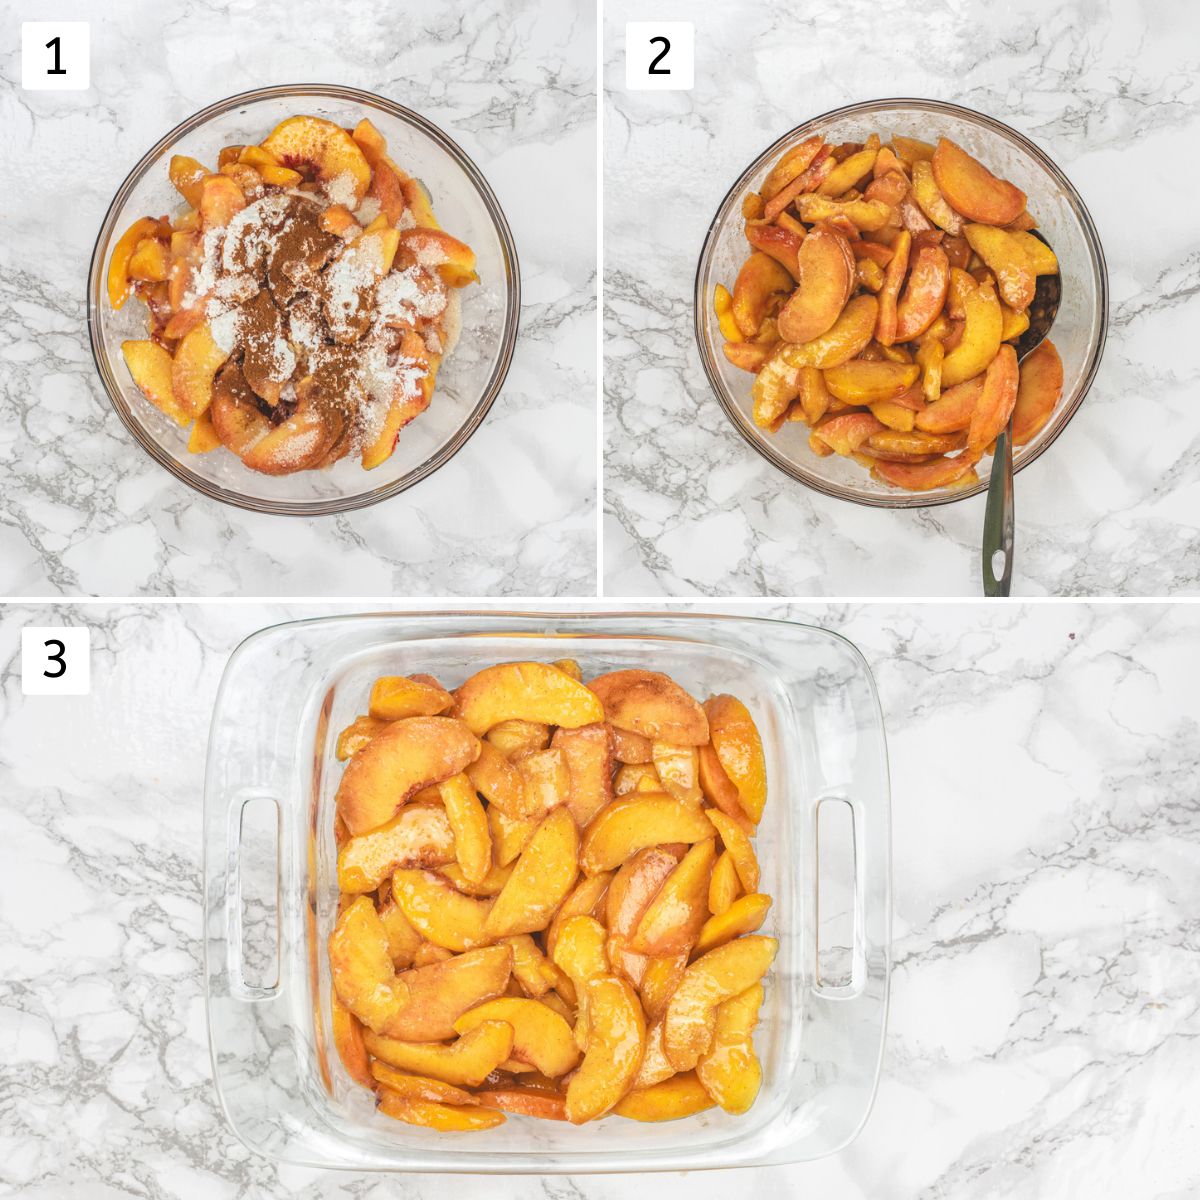 Collage of 3 images showing making peach mixture and adding into a baking dish.